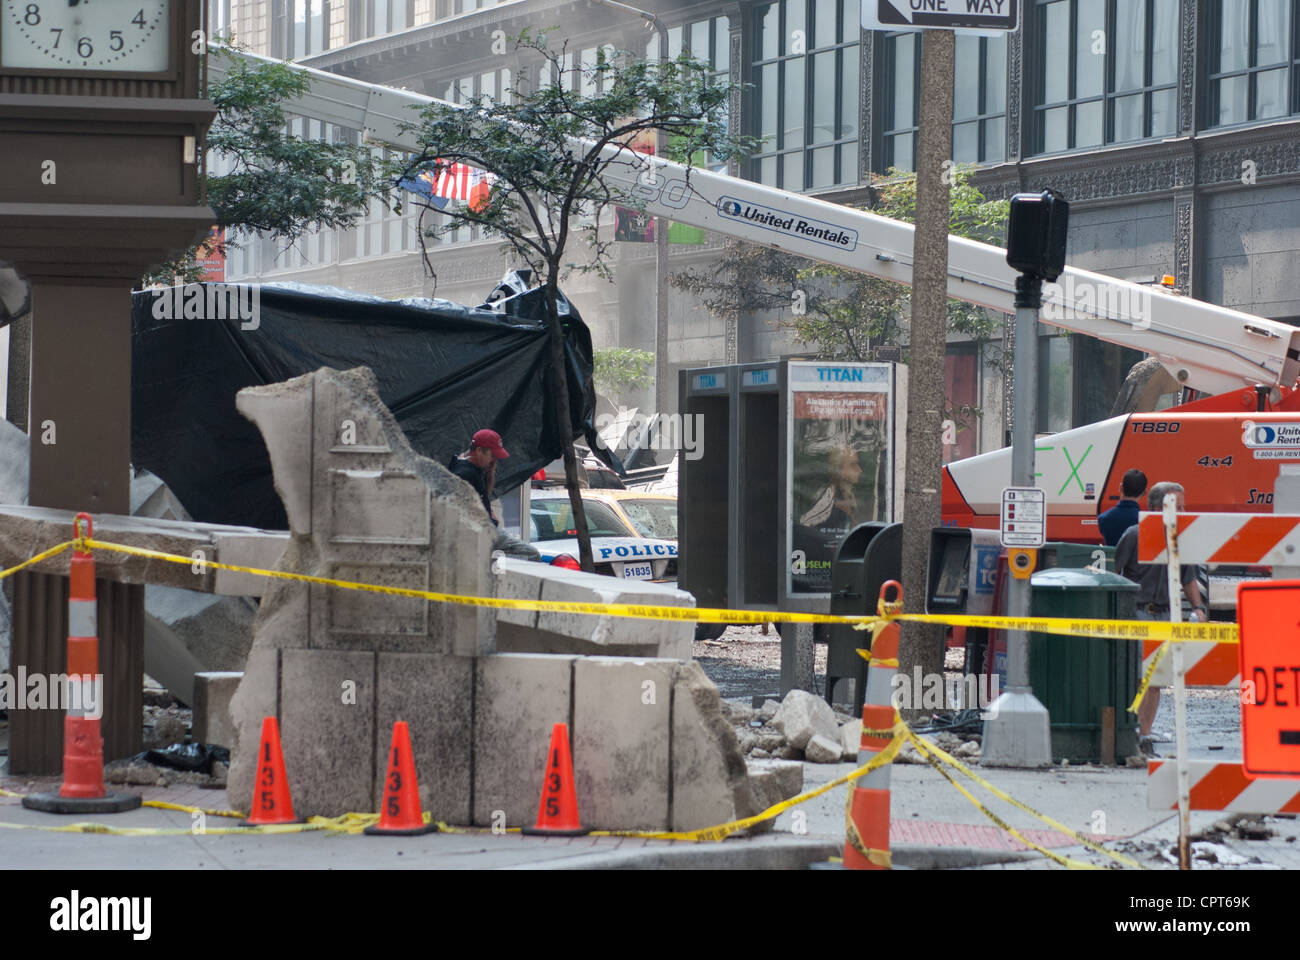 Film crew prepares for shooting of next scene of Marvel's The Avengers  (2012) movie Friday, August 19, 2011, in Cleveland Ohio Stock Photo - Alamy